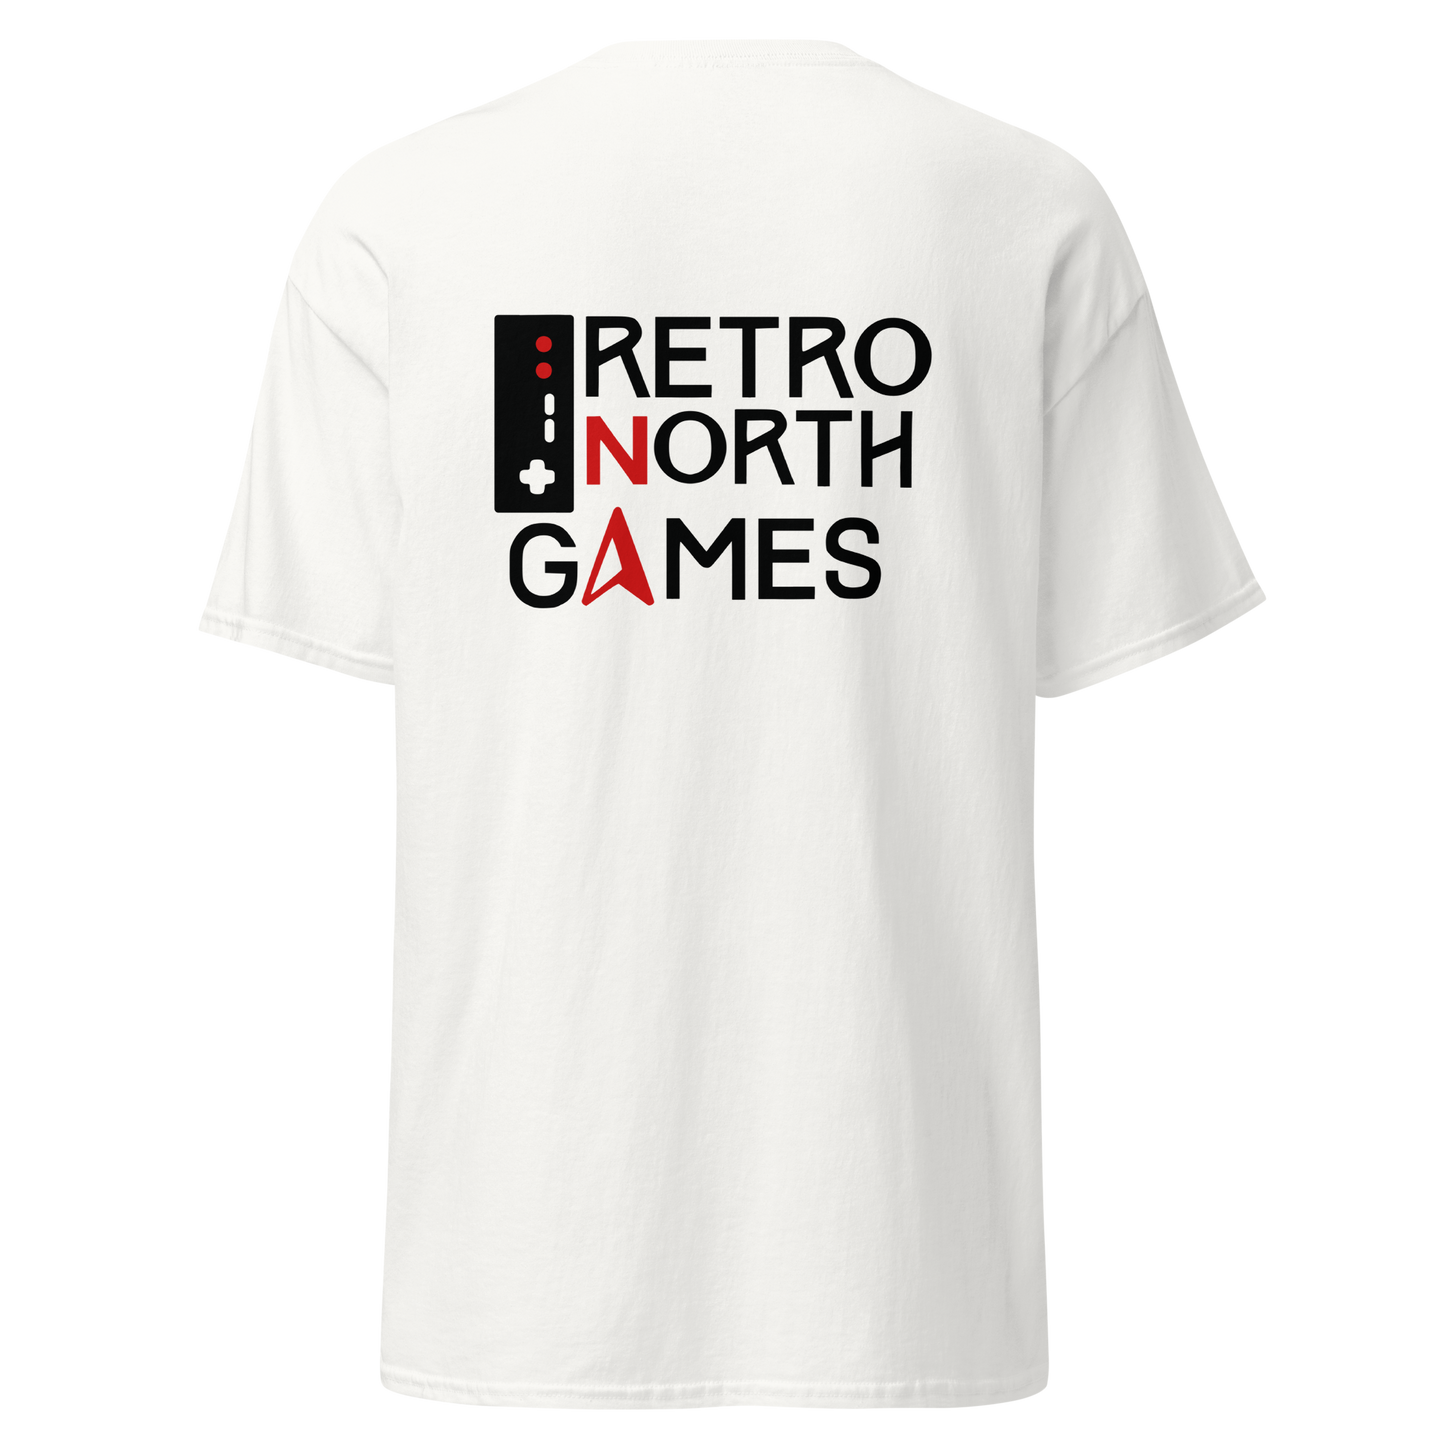 RNG Classic Tee